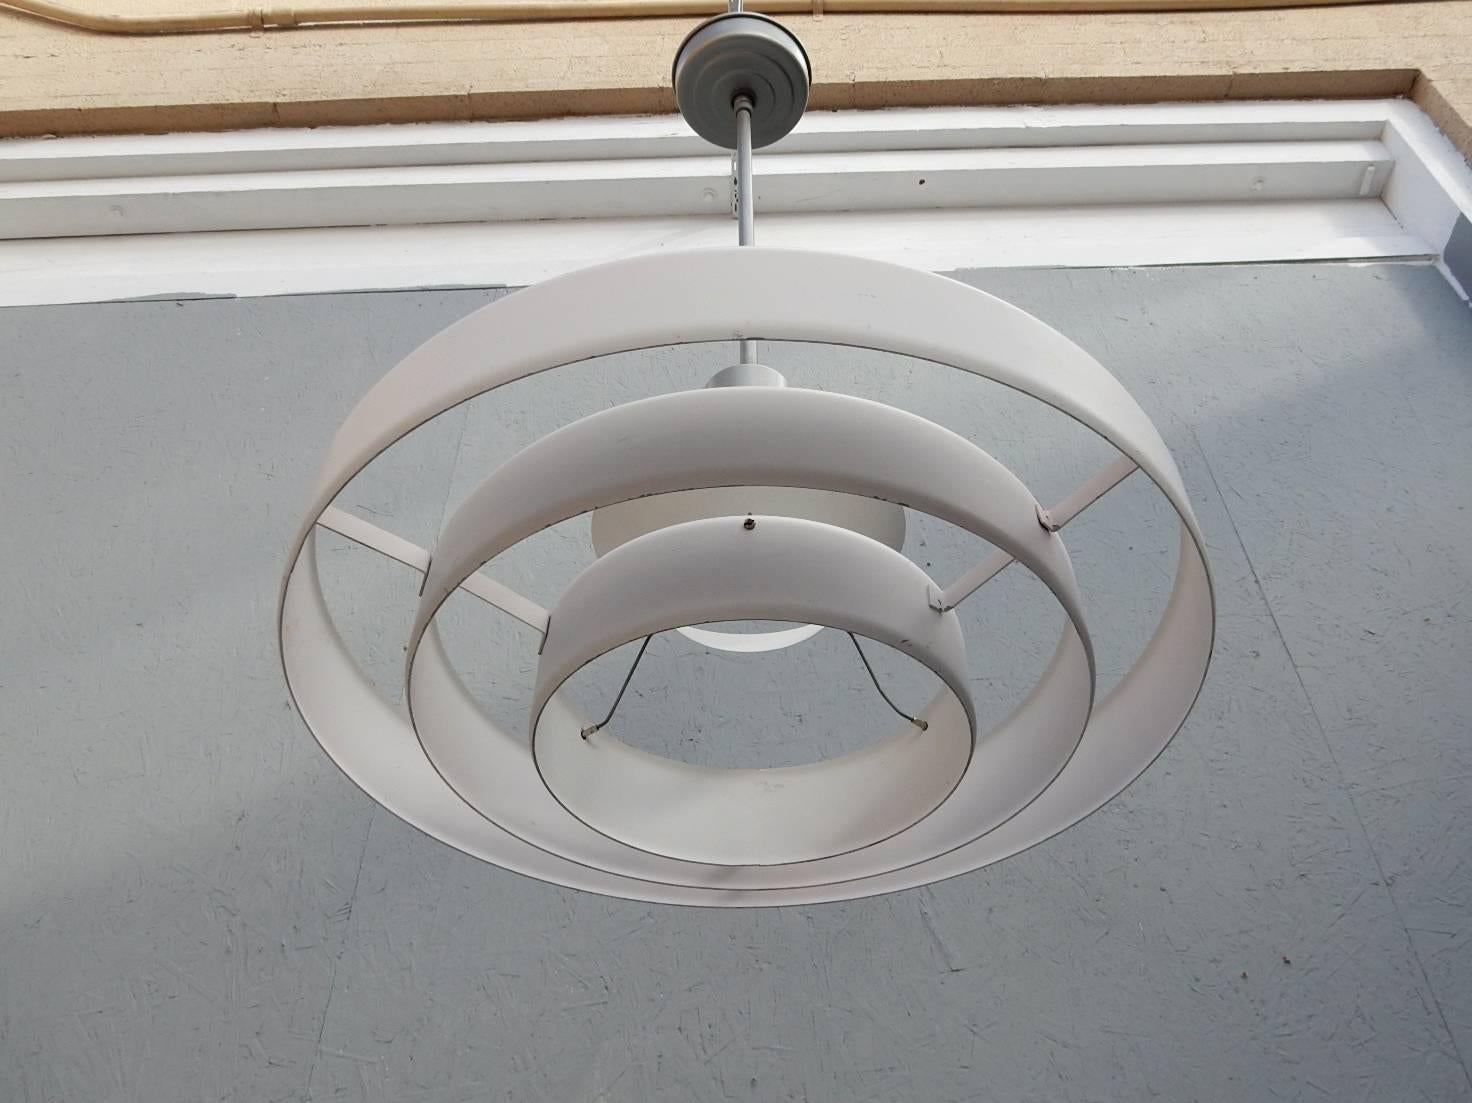 Classic Industrial Mid-Century pendant lamp designed by Kurt Versen circa 1950s. Three ring with bulb shade. Metallic nickel down rod and ceiling cap and putty white rings. 40+ available (un-restored), priced per item. Contact for quantity discount.